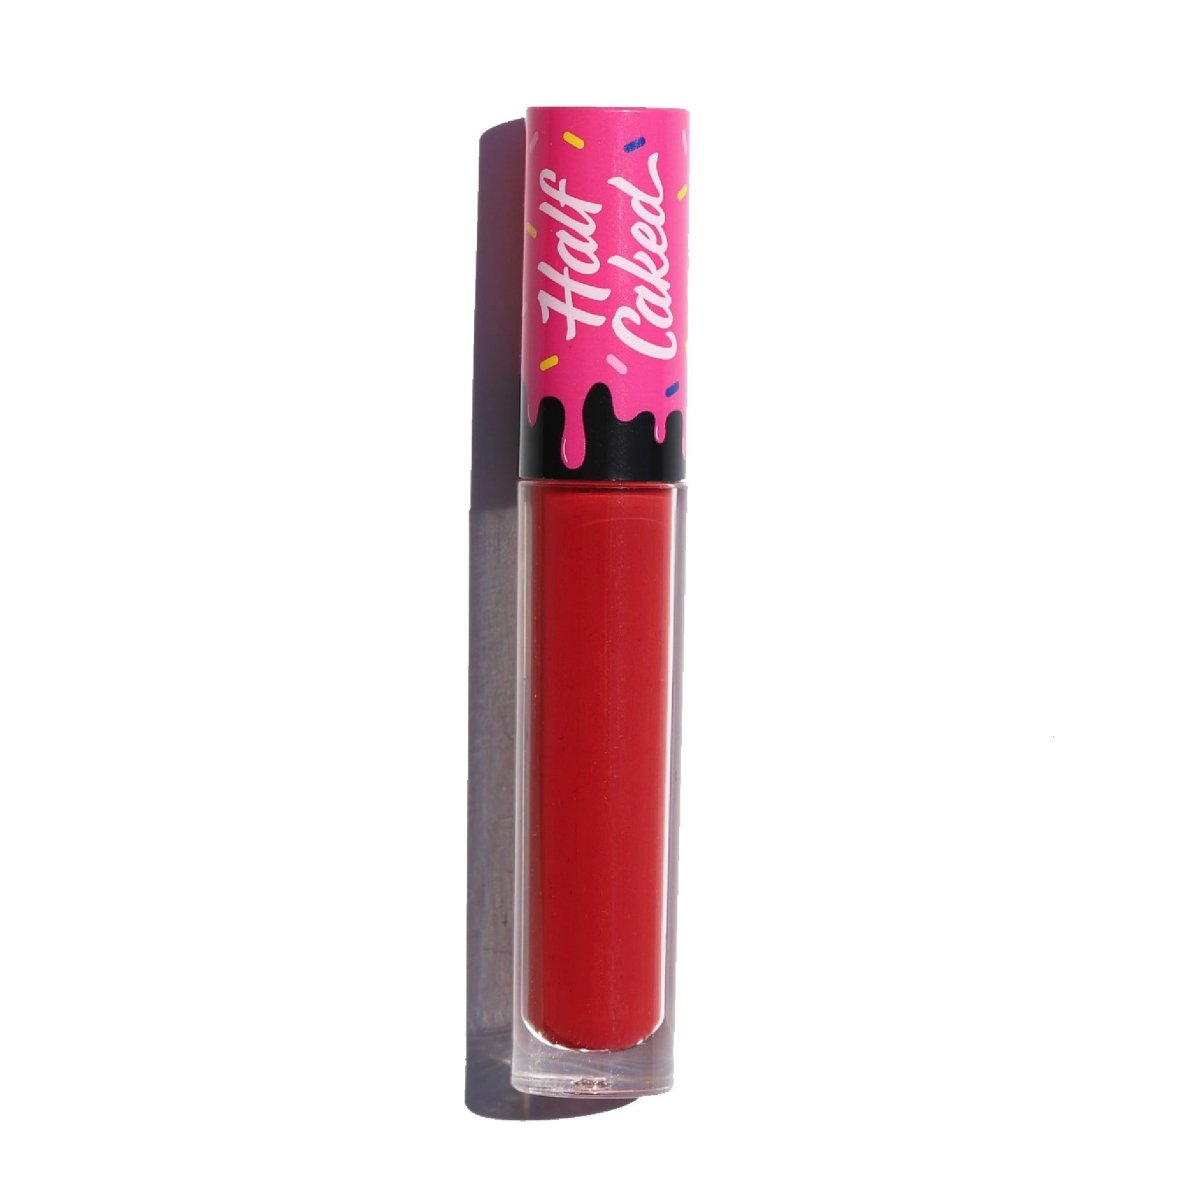 Red liquid lipstick with a pink sprinkle frosting cap -Lip Fondant Liquid Lipstick - Half Caked